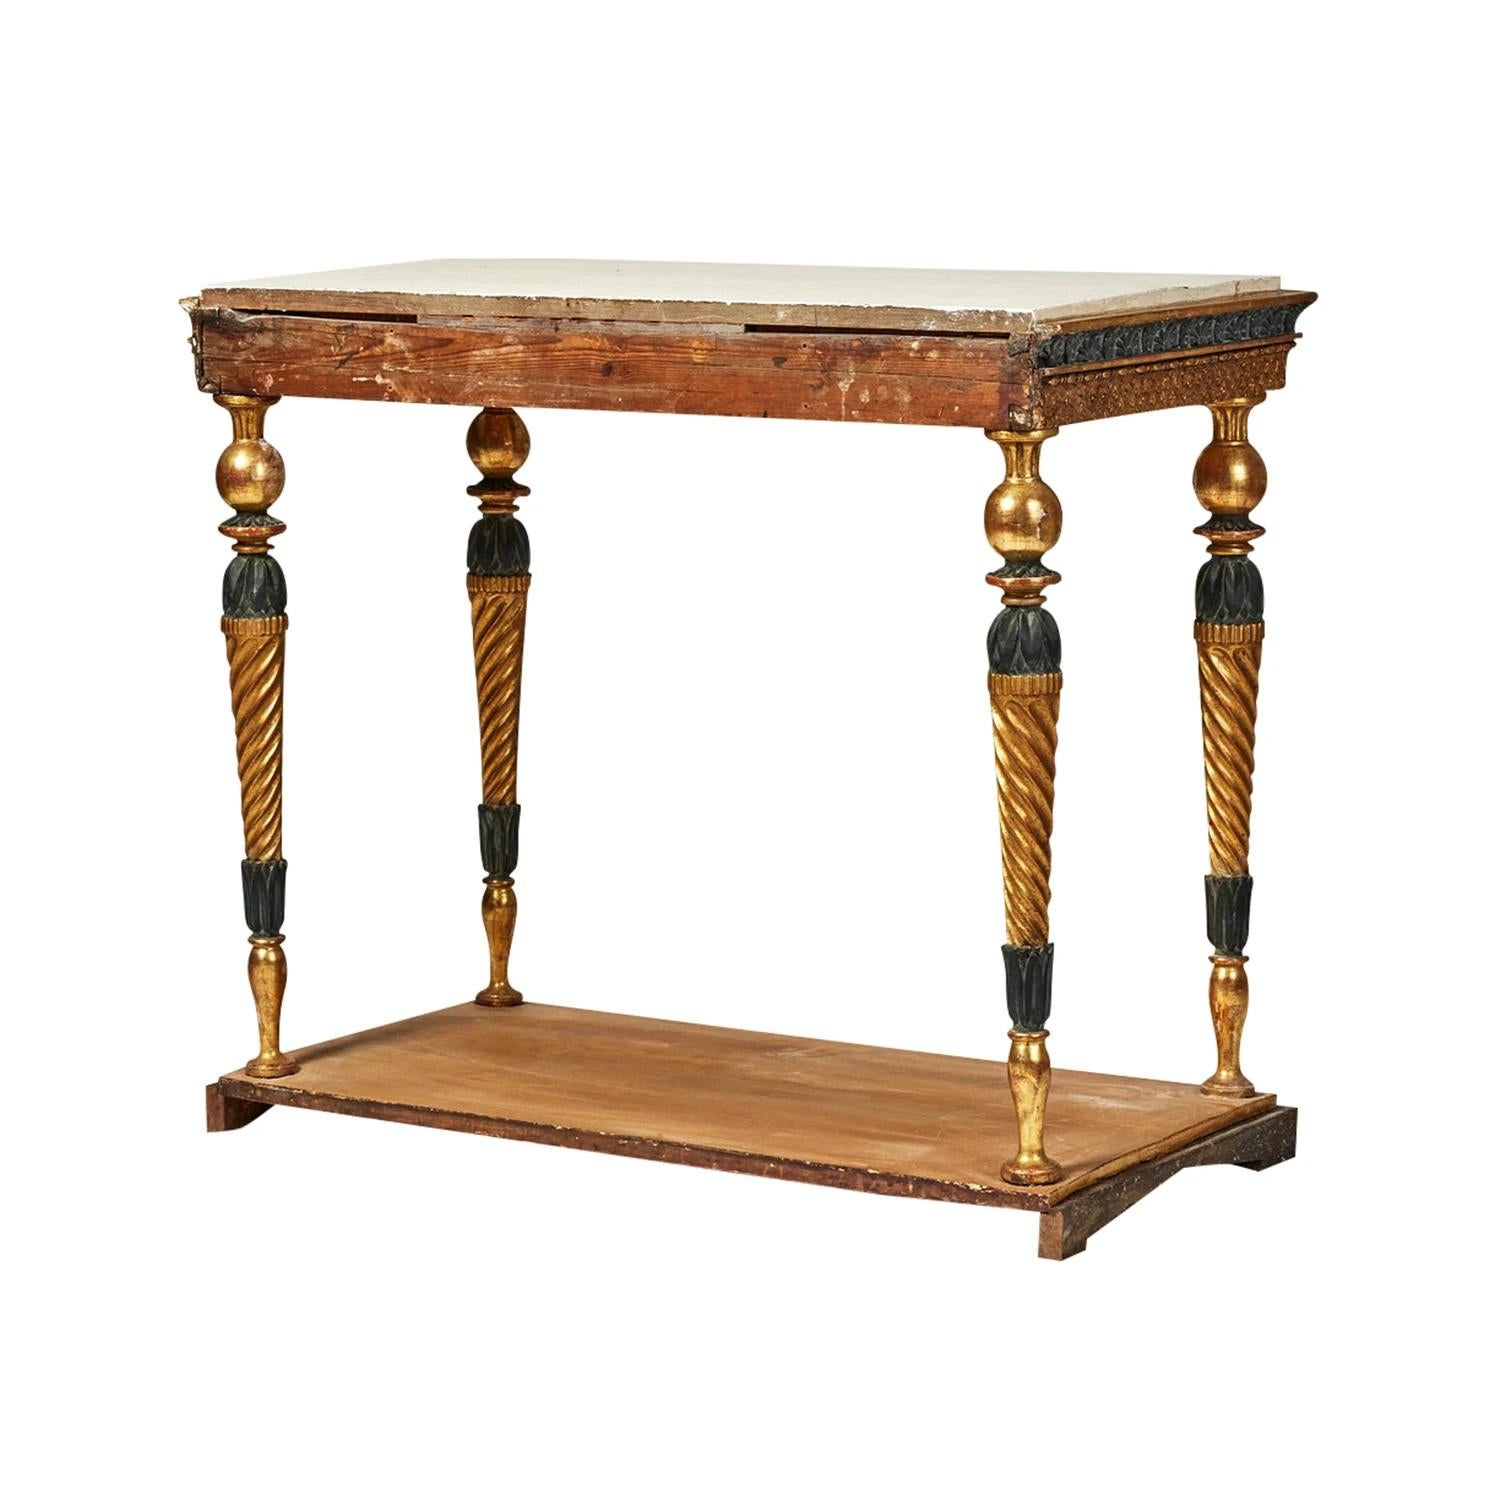 A gold, antique Swedish Gustavian freestanding console table made of hand crafted gilded Pinewood with a white-grey painted marble top, designed and produced most likely by Jonas Frisk in good condition. The edges, borders of the Scandinavian side